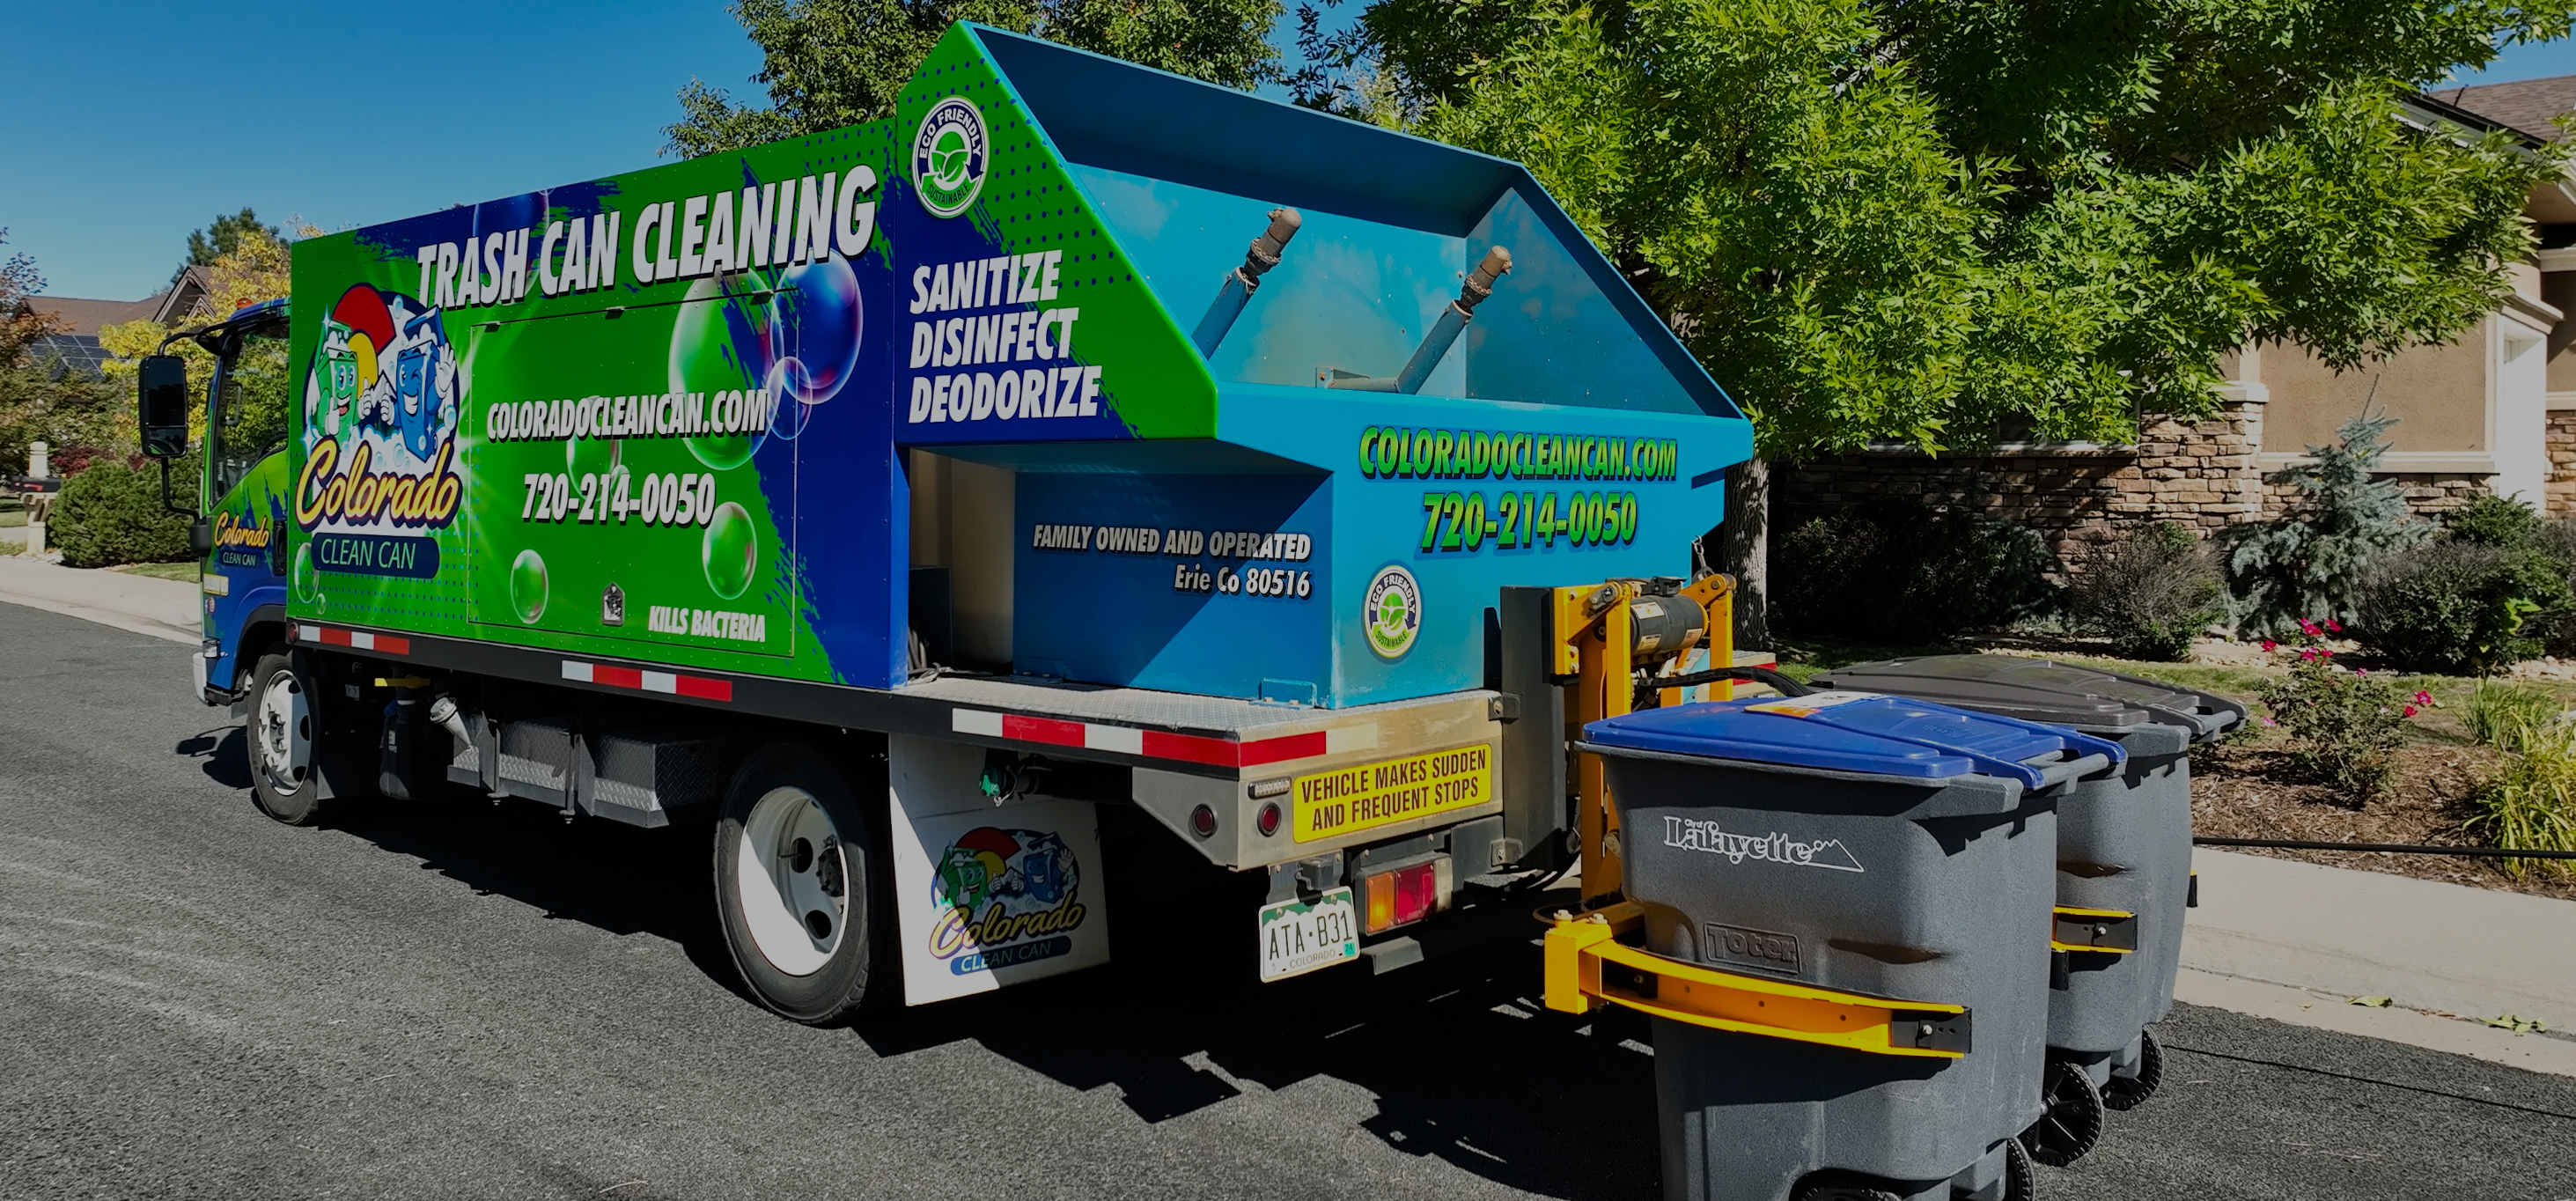 images/Colorado-Trash-Can-Cleaning-Services.jpg